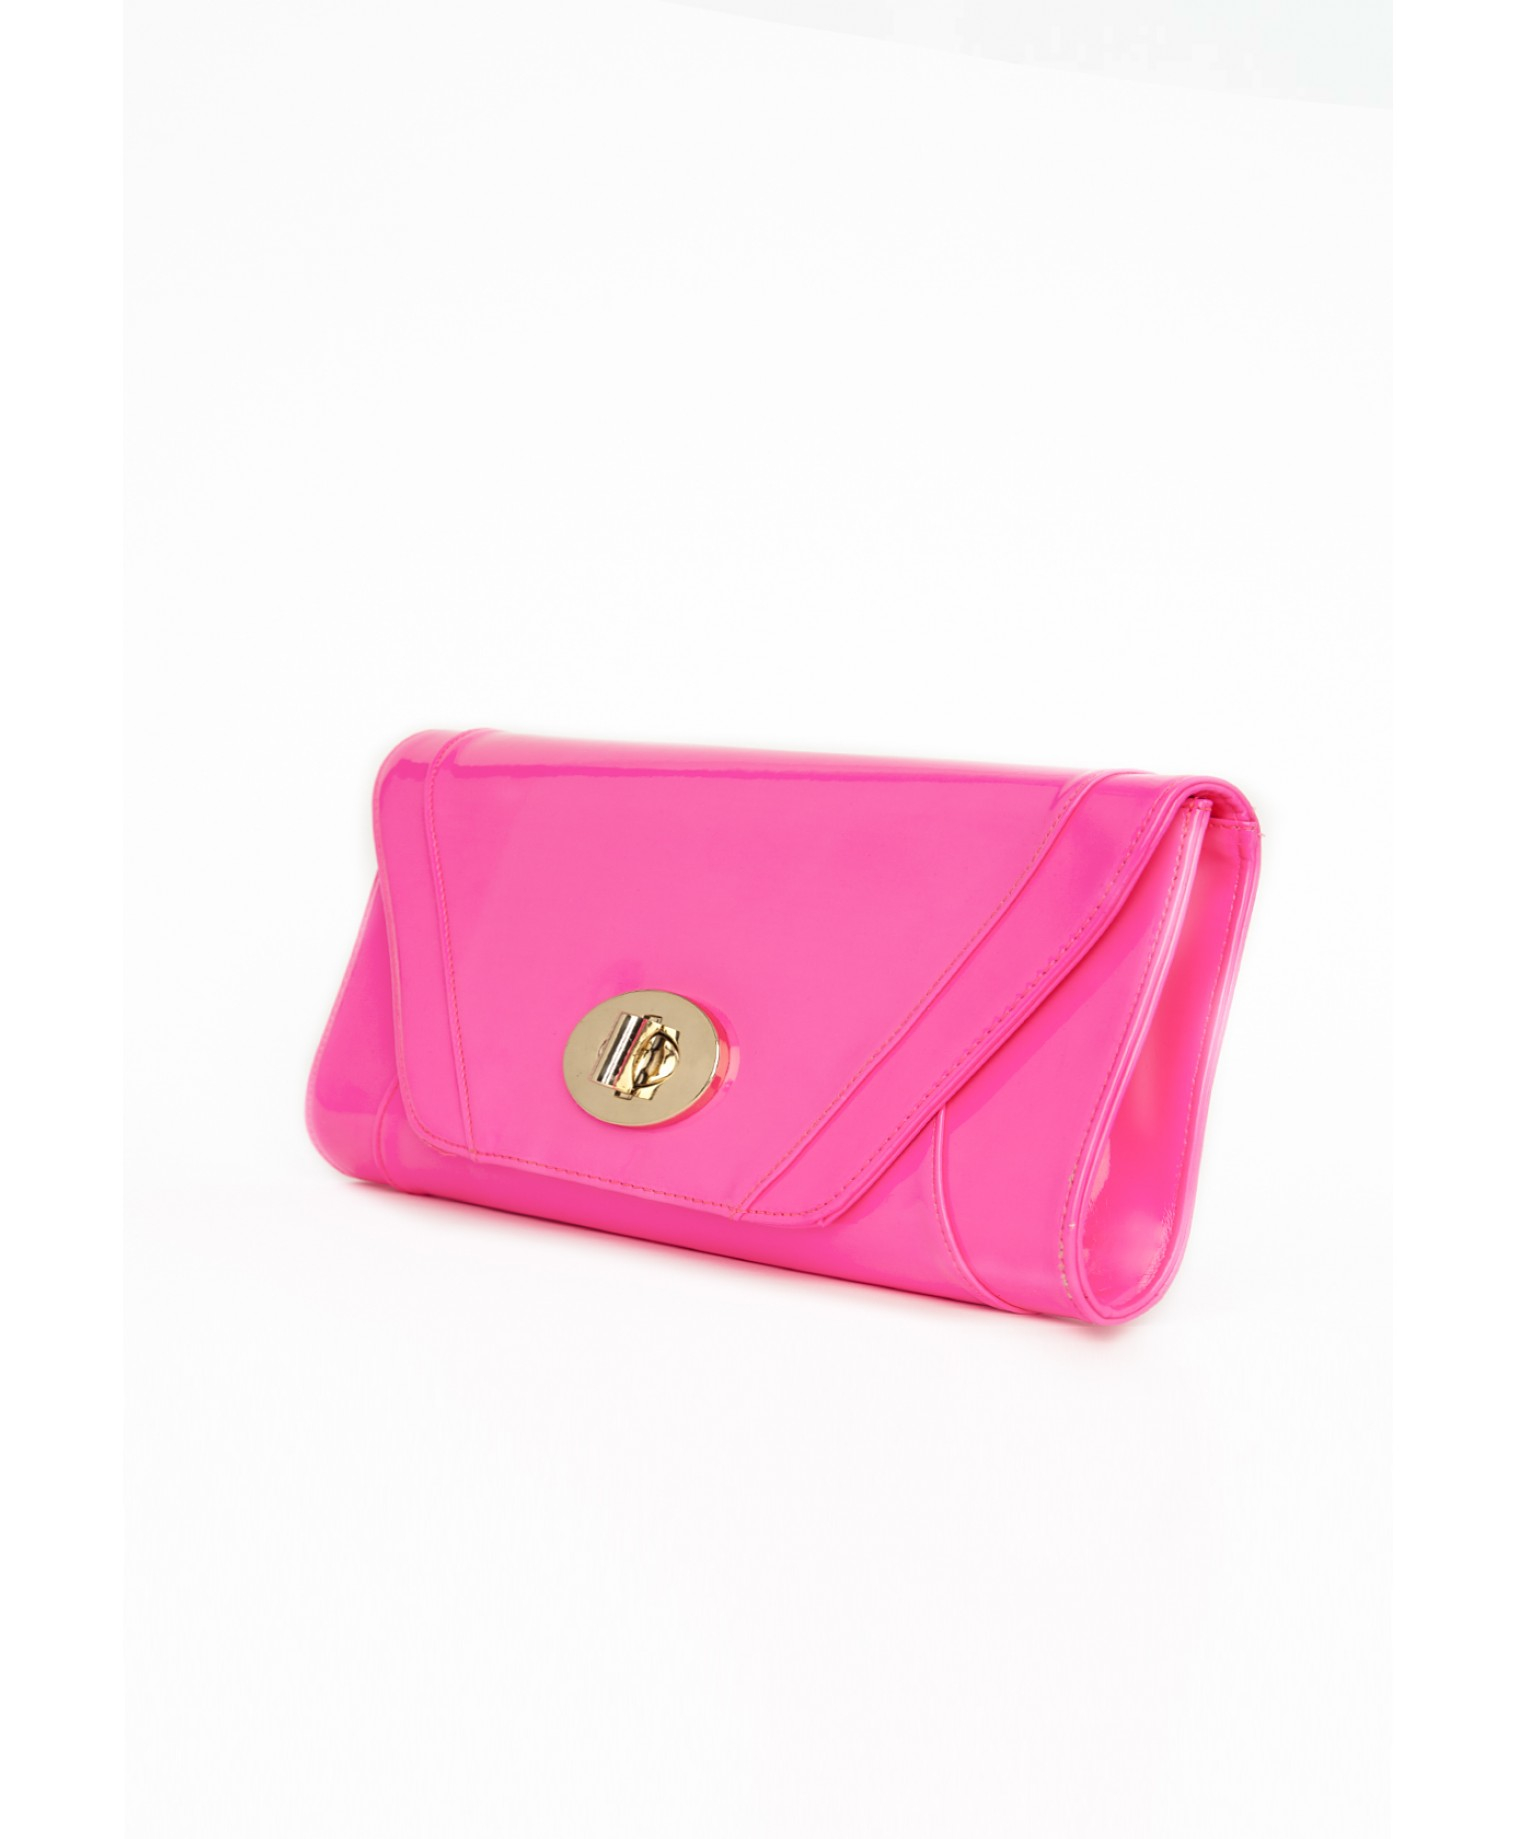 Missguided Chardae Neon Pink Patent Envelope Clutch Bag in Pink | Lyst